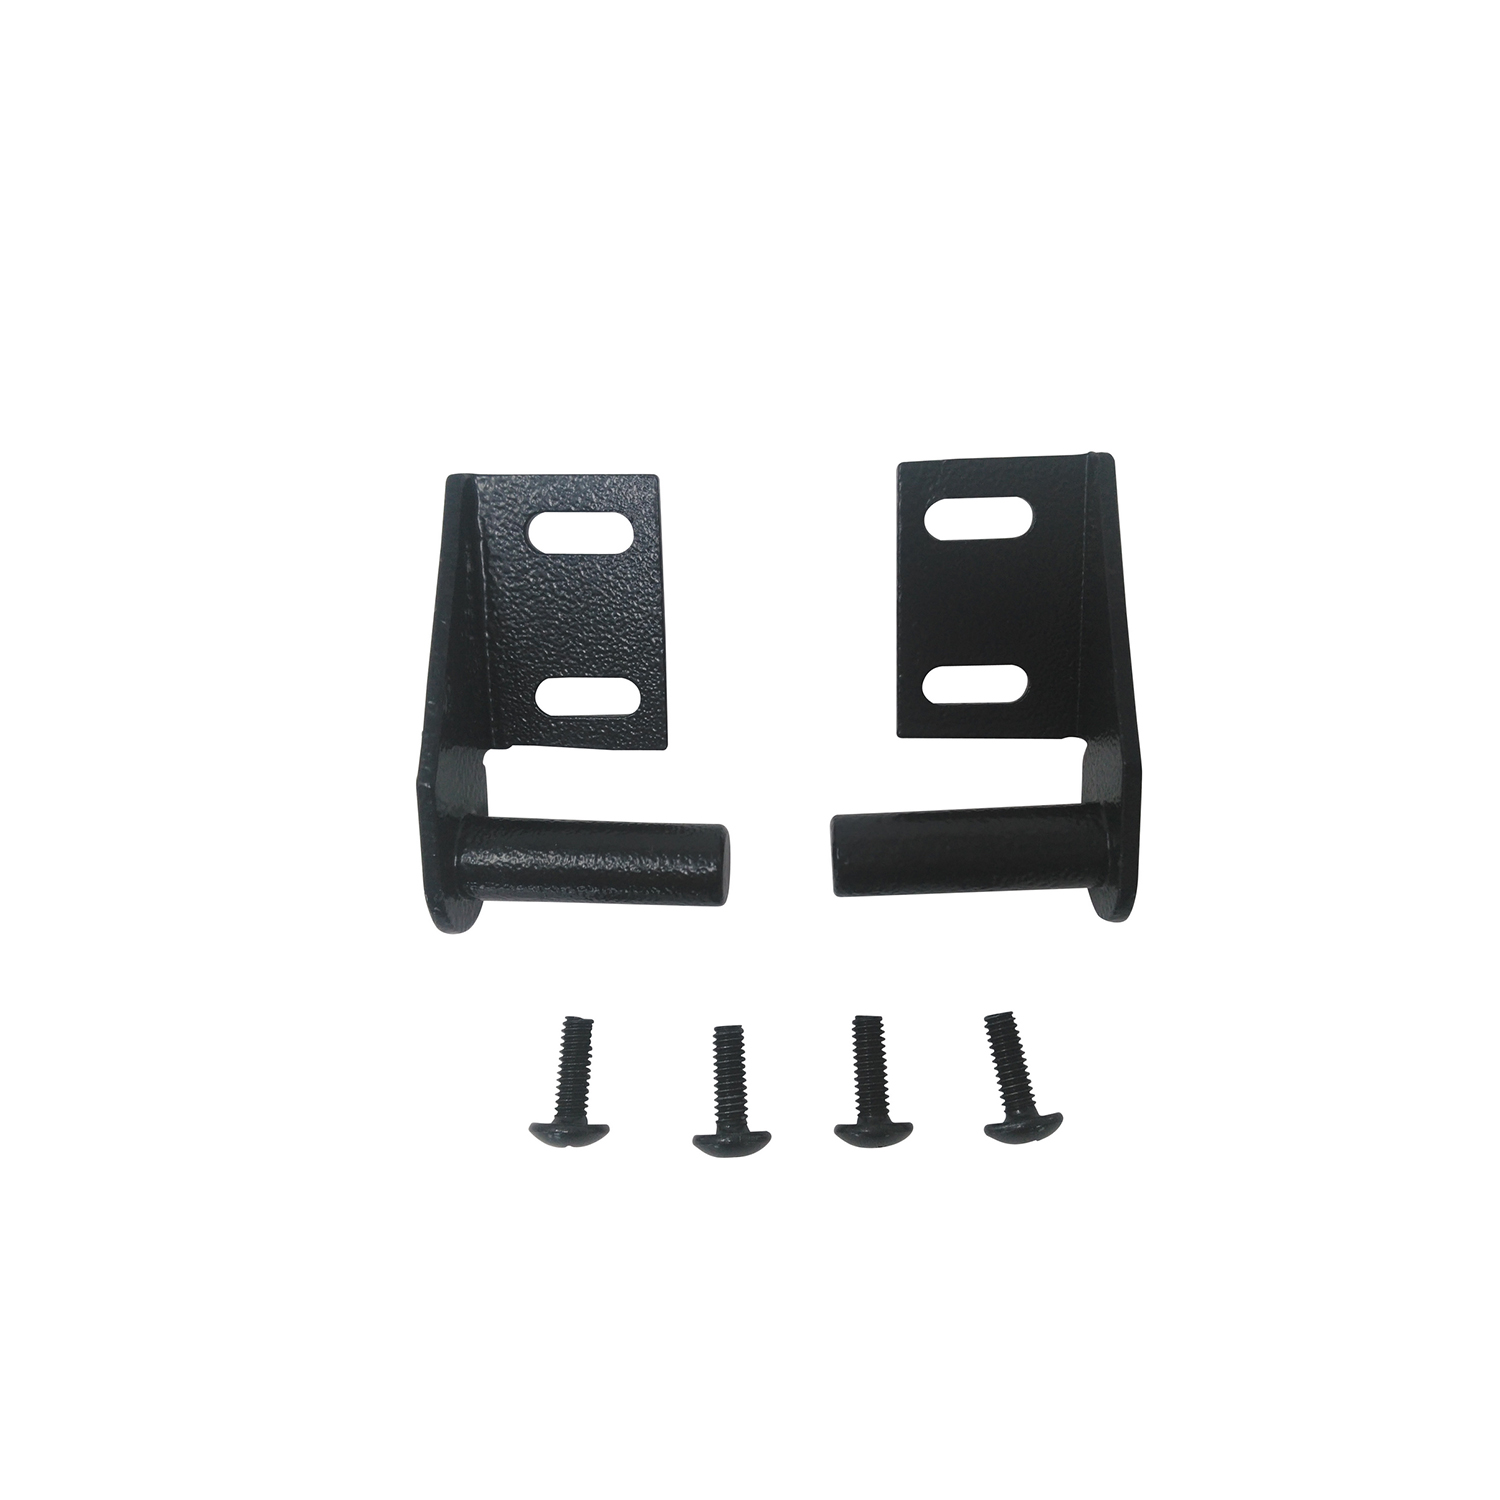 Lid Hinges Kit for Traeger Pellet Grill-YAOAWE